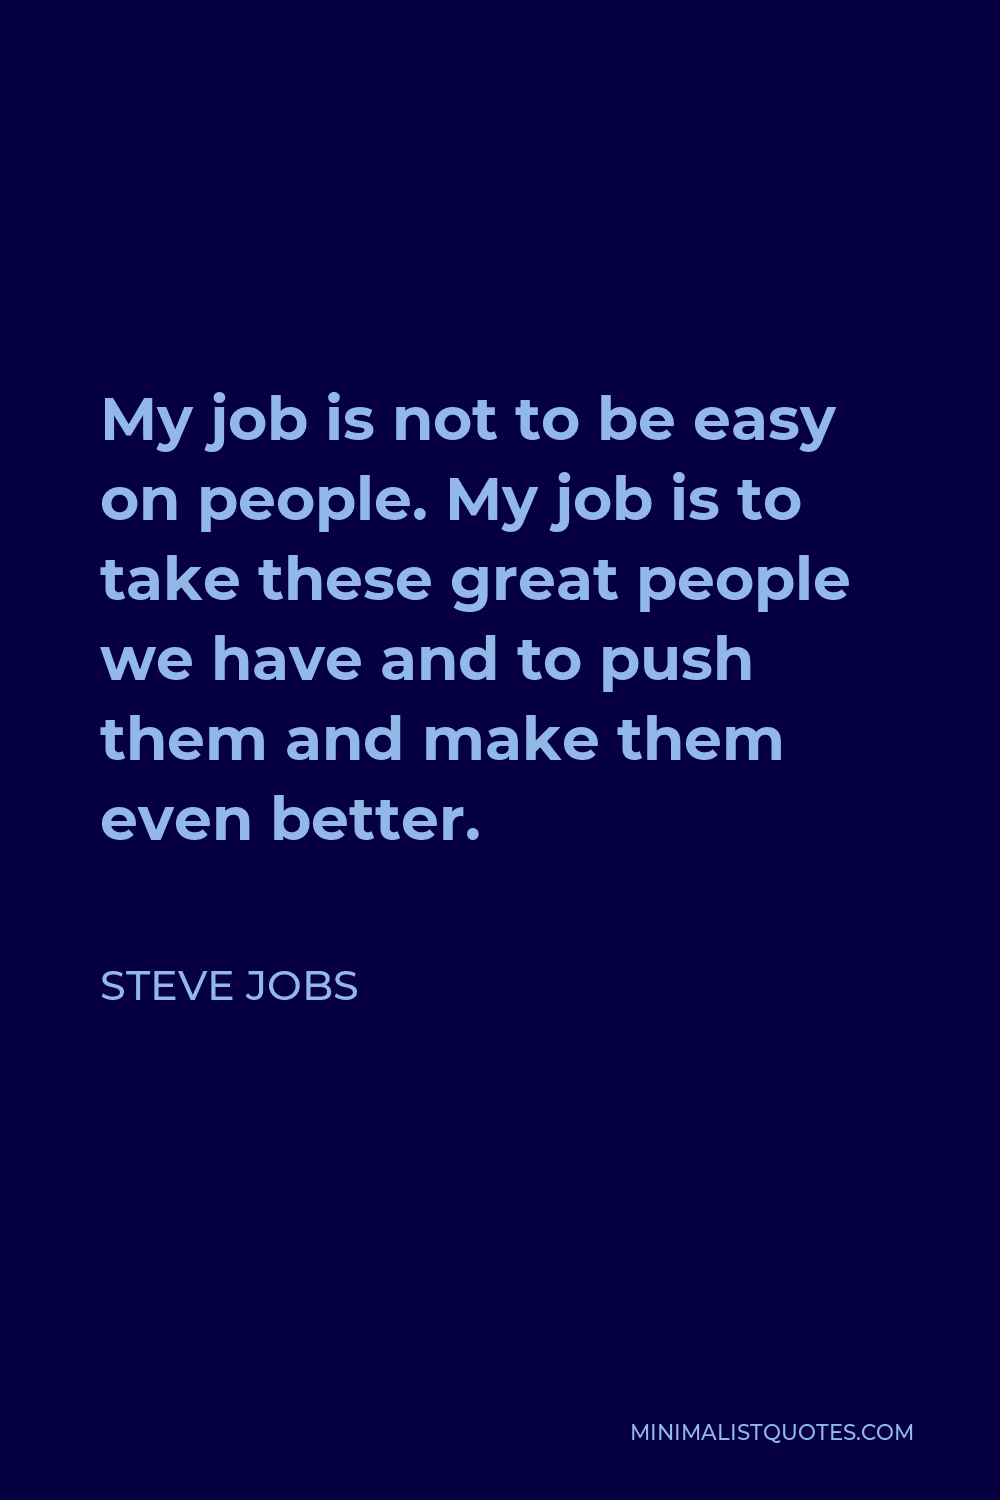 Steve Jobs Quote - My job is not to be easy on people. My job is to take these great people we have and to push them and make them even better.